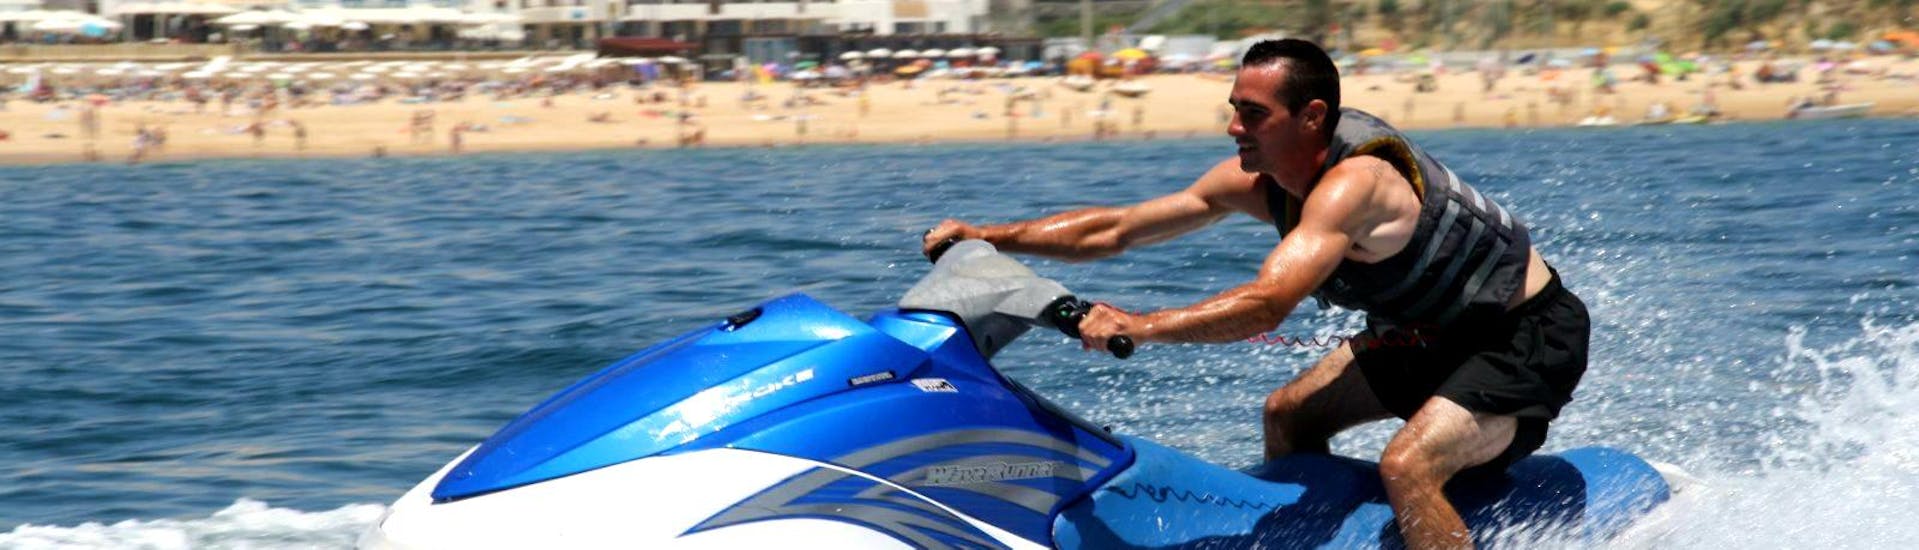 A man enjoying his fast ride off the coast of Albufeira on the Duo Jetski he hired from Dream Wave.